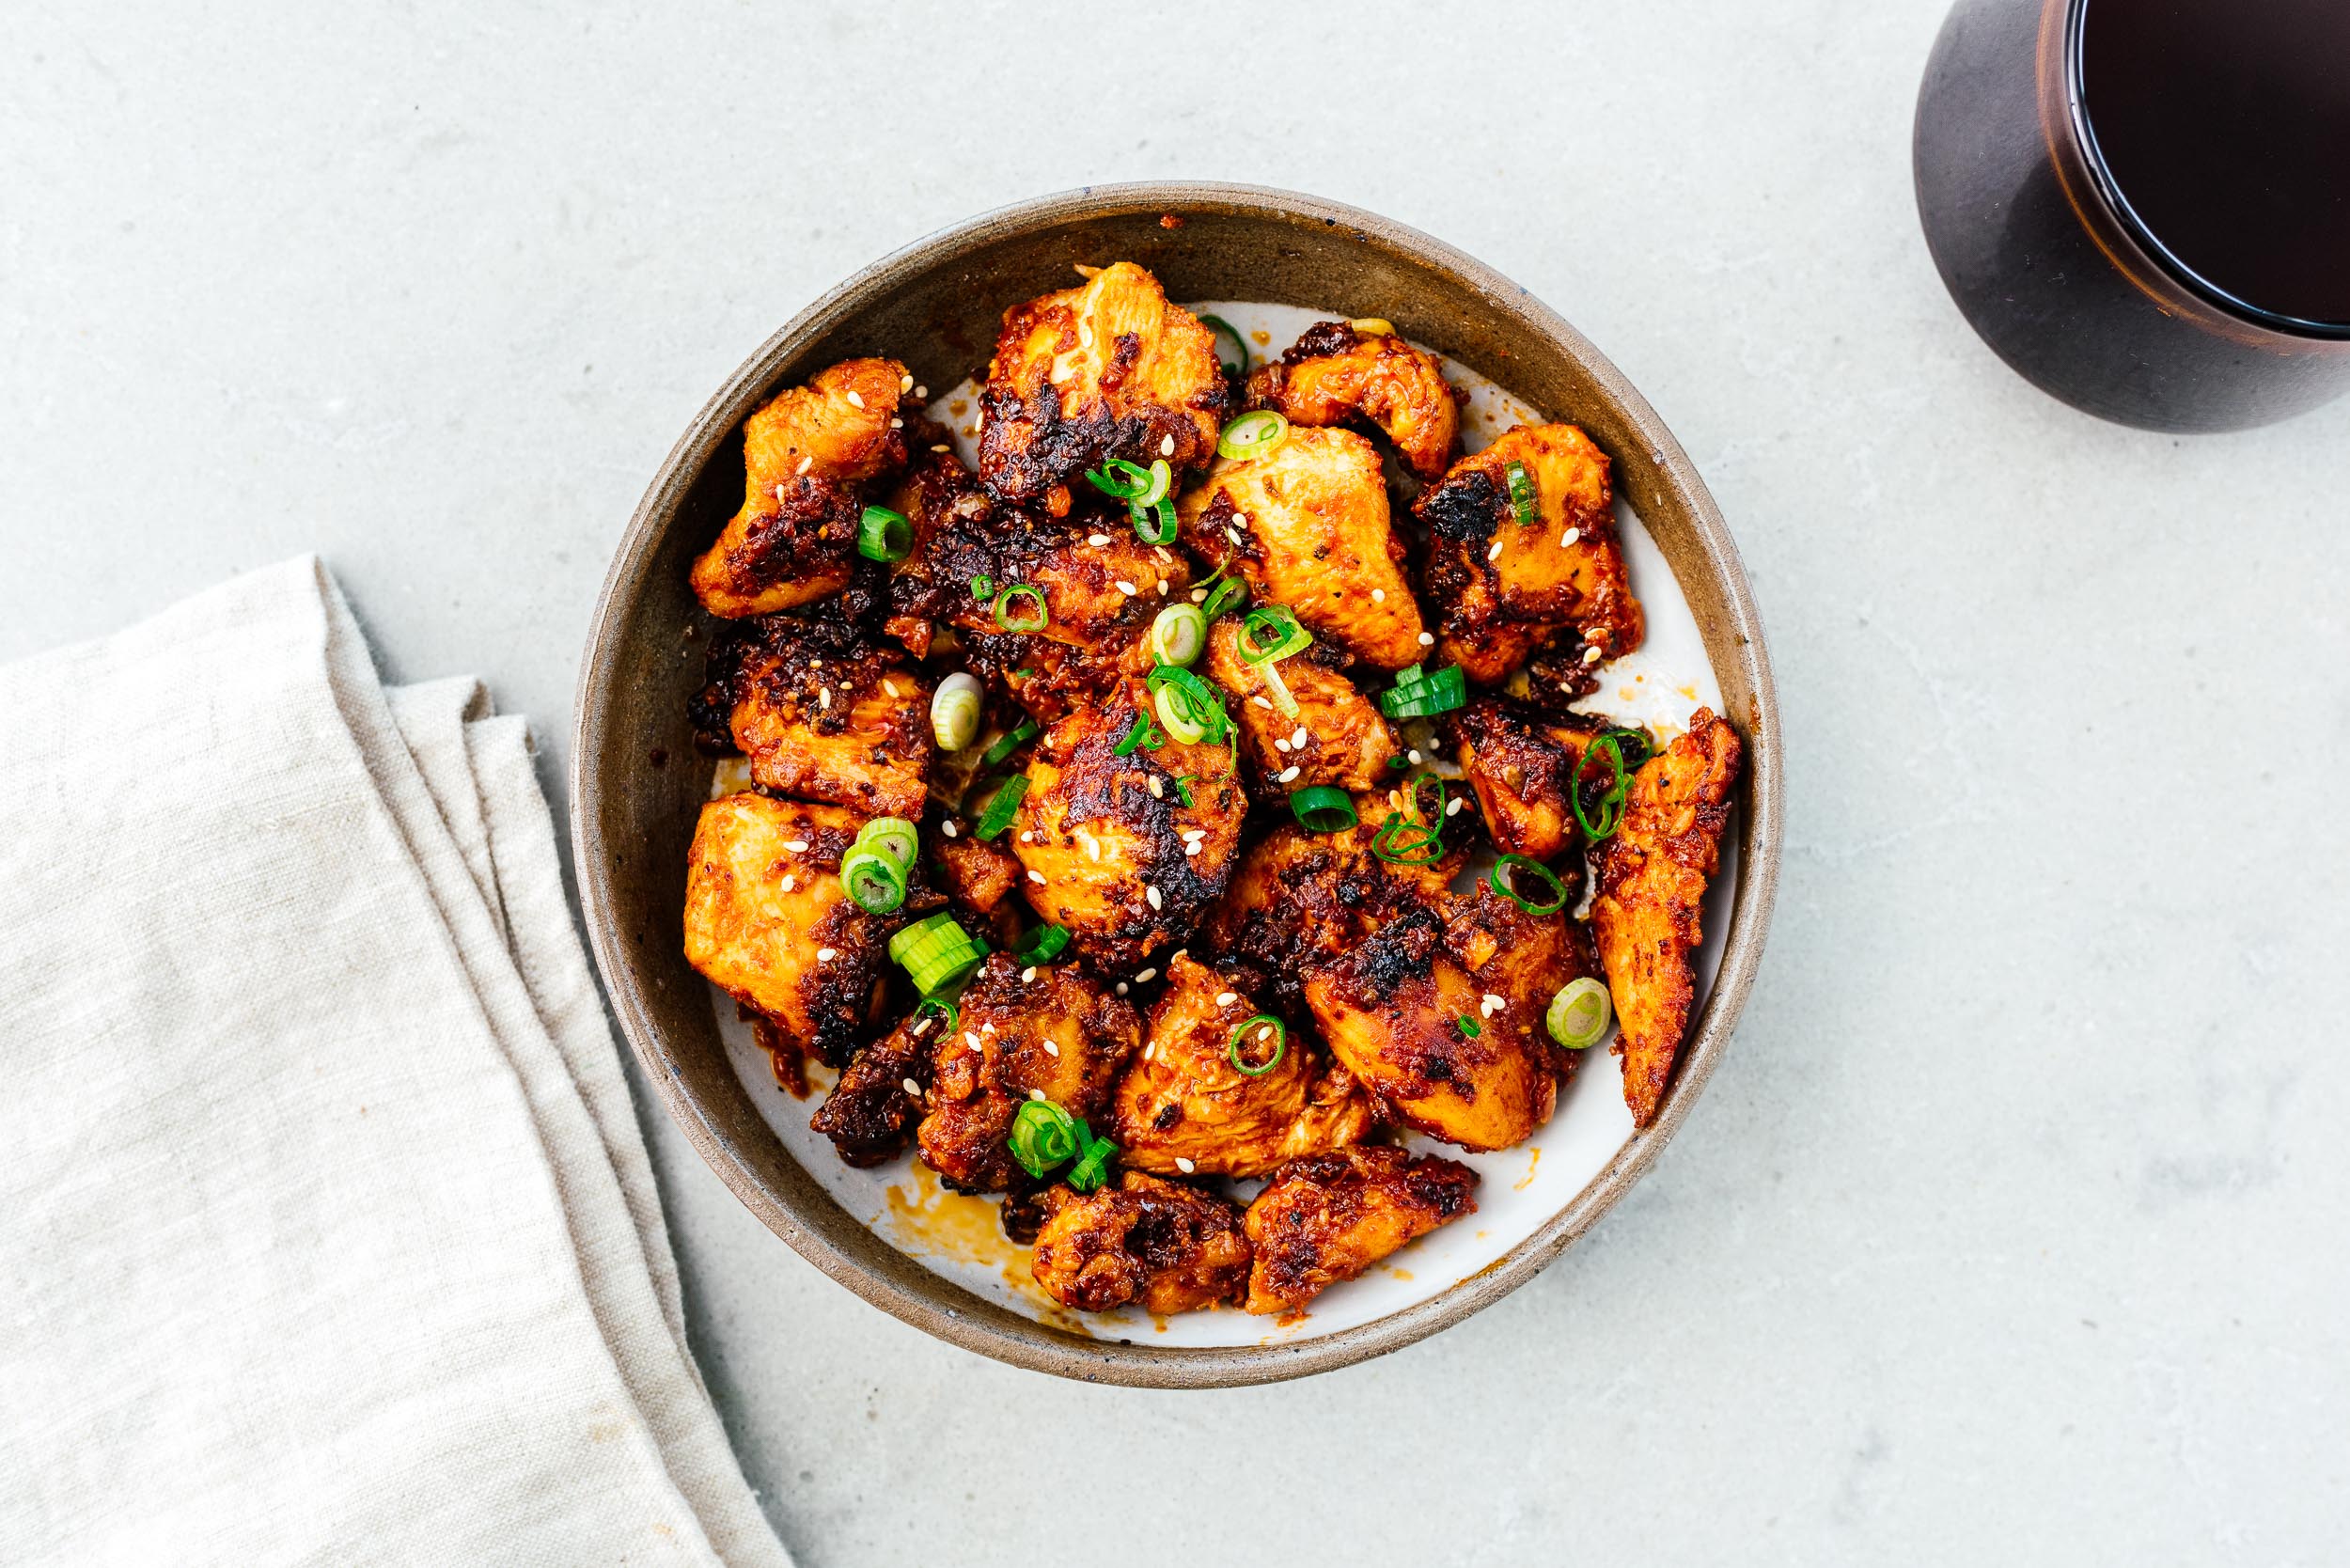 Buldak: The Spicy Chicken You Never Knew You Loved